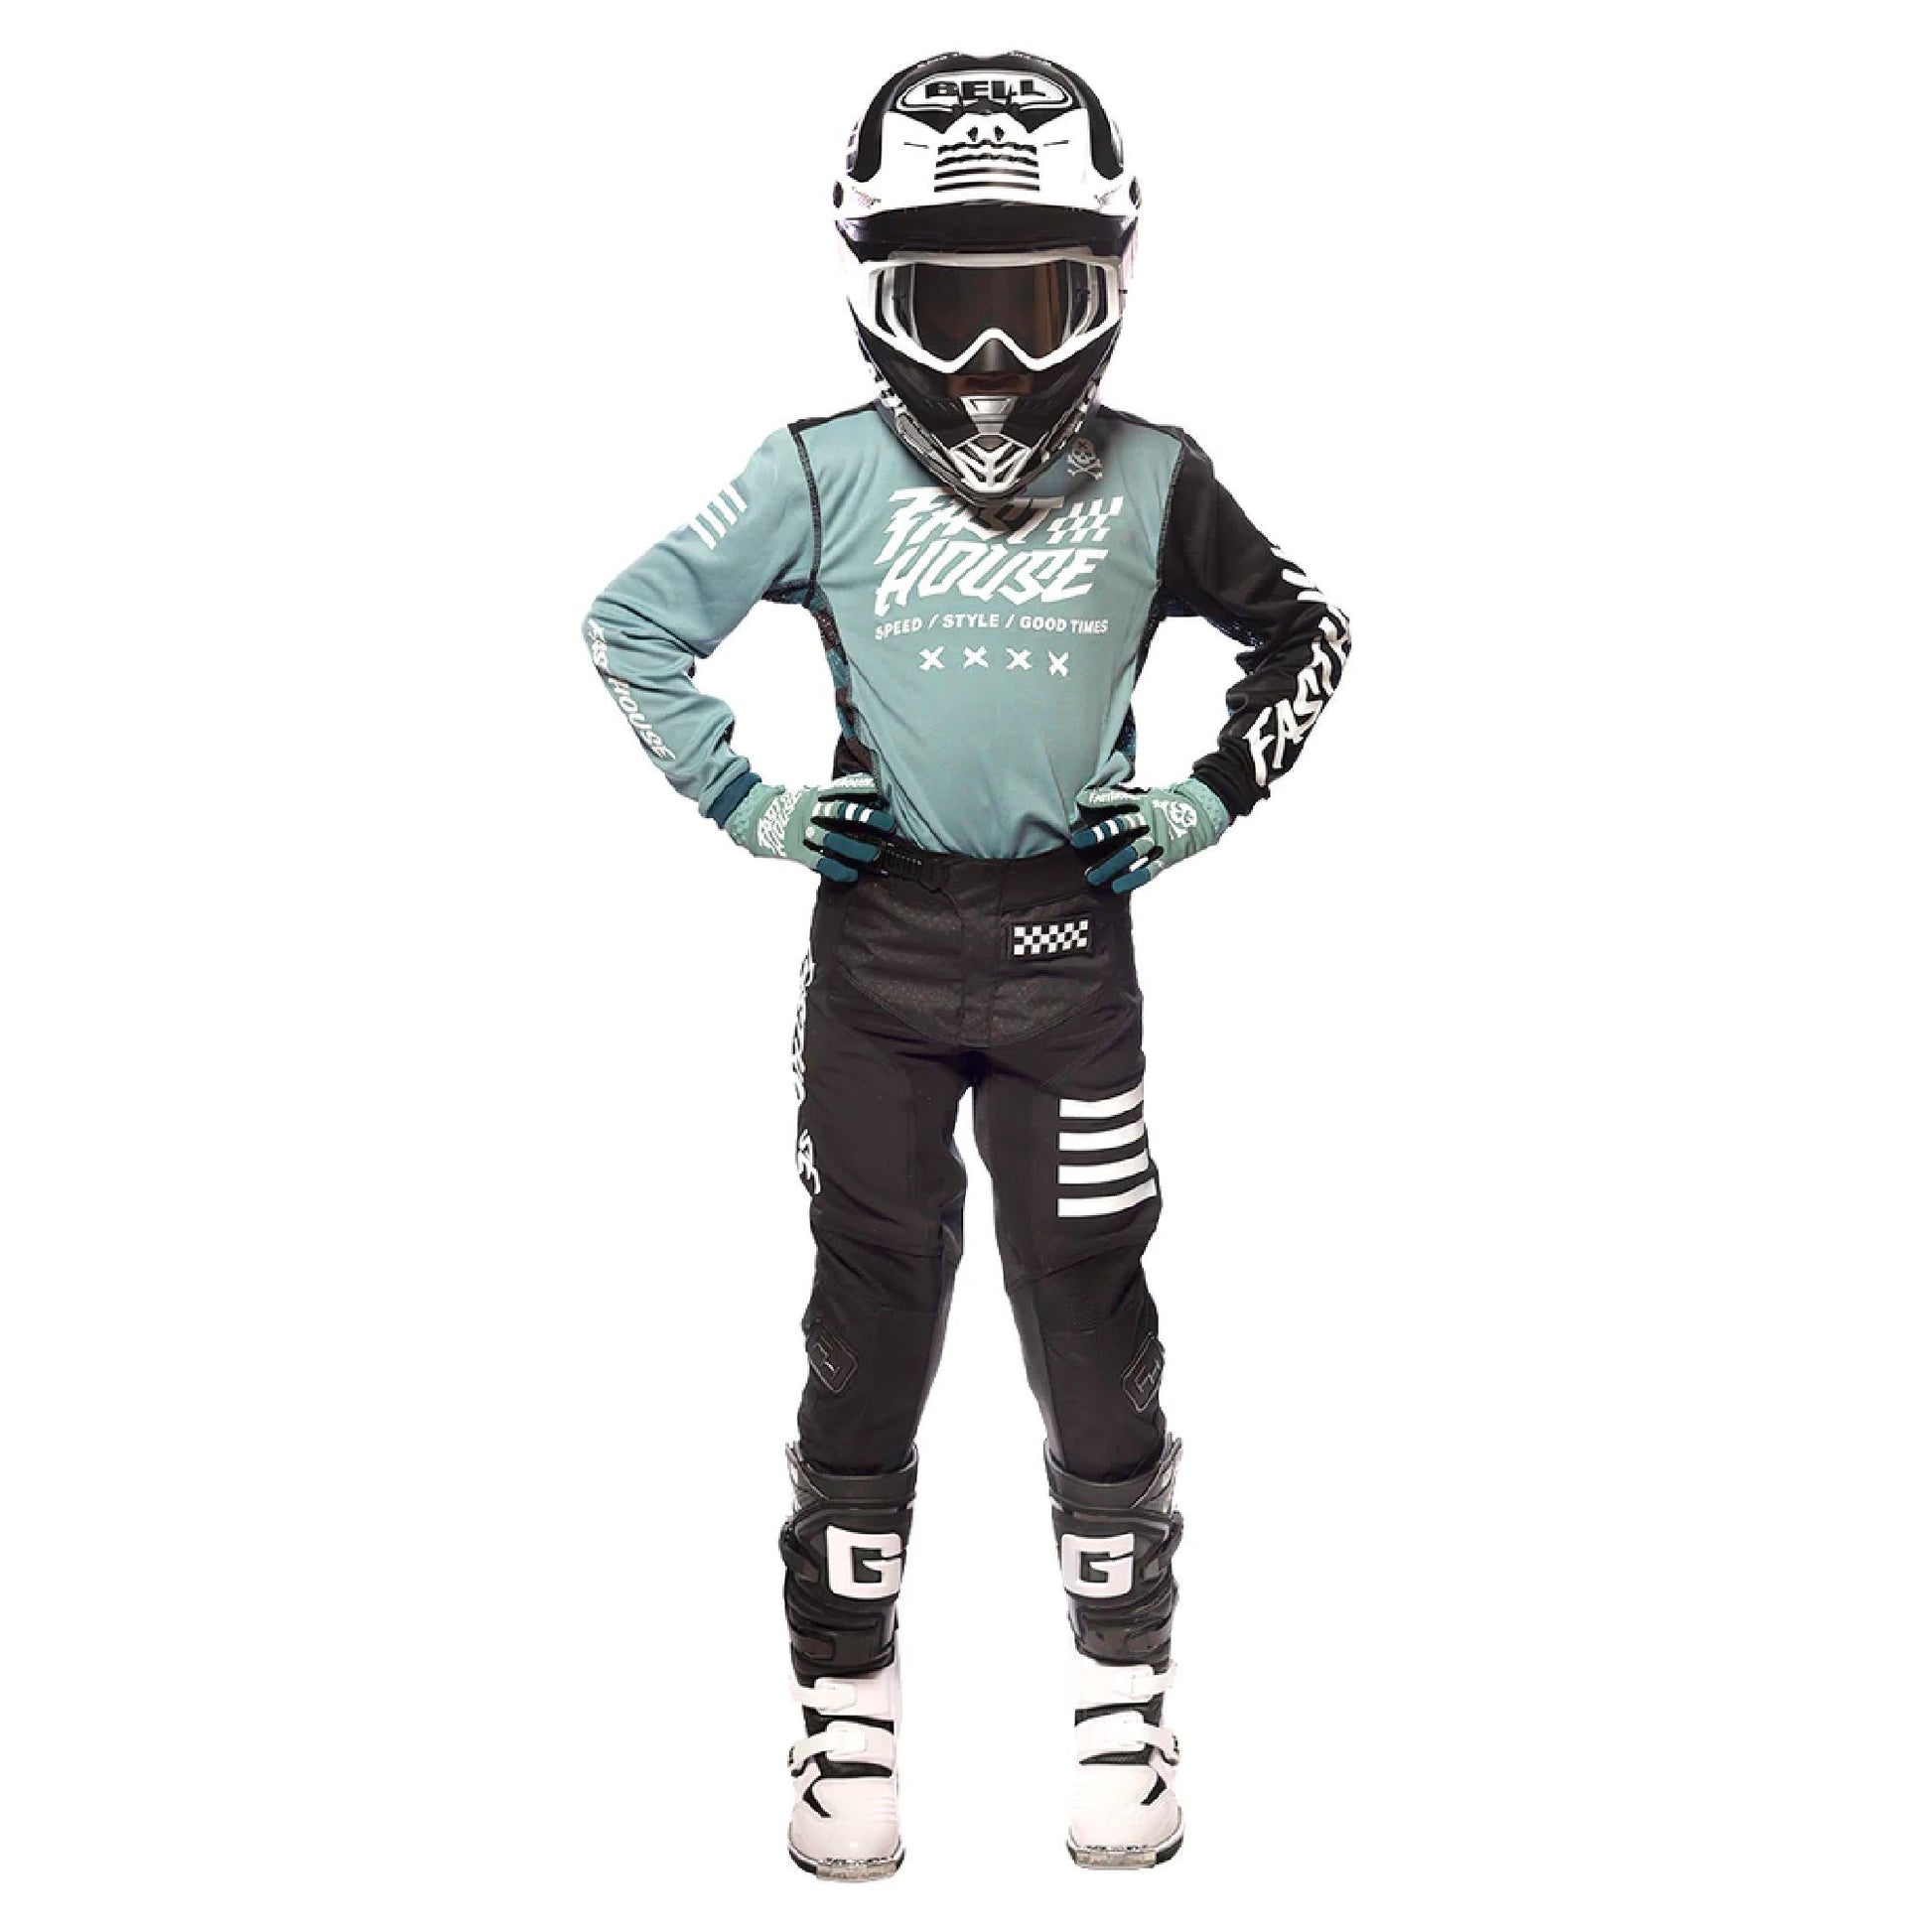 Fasthouse Youth Girls' Speed Style Pant Black Bike Pants